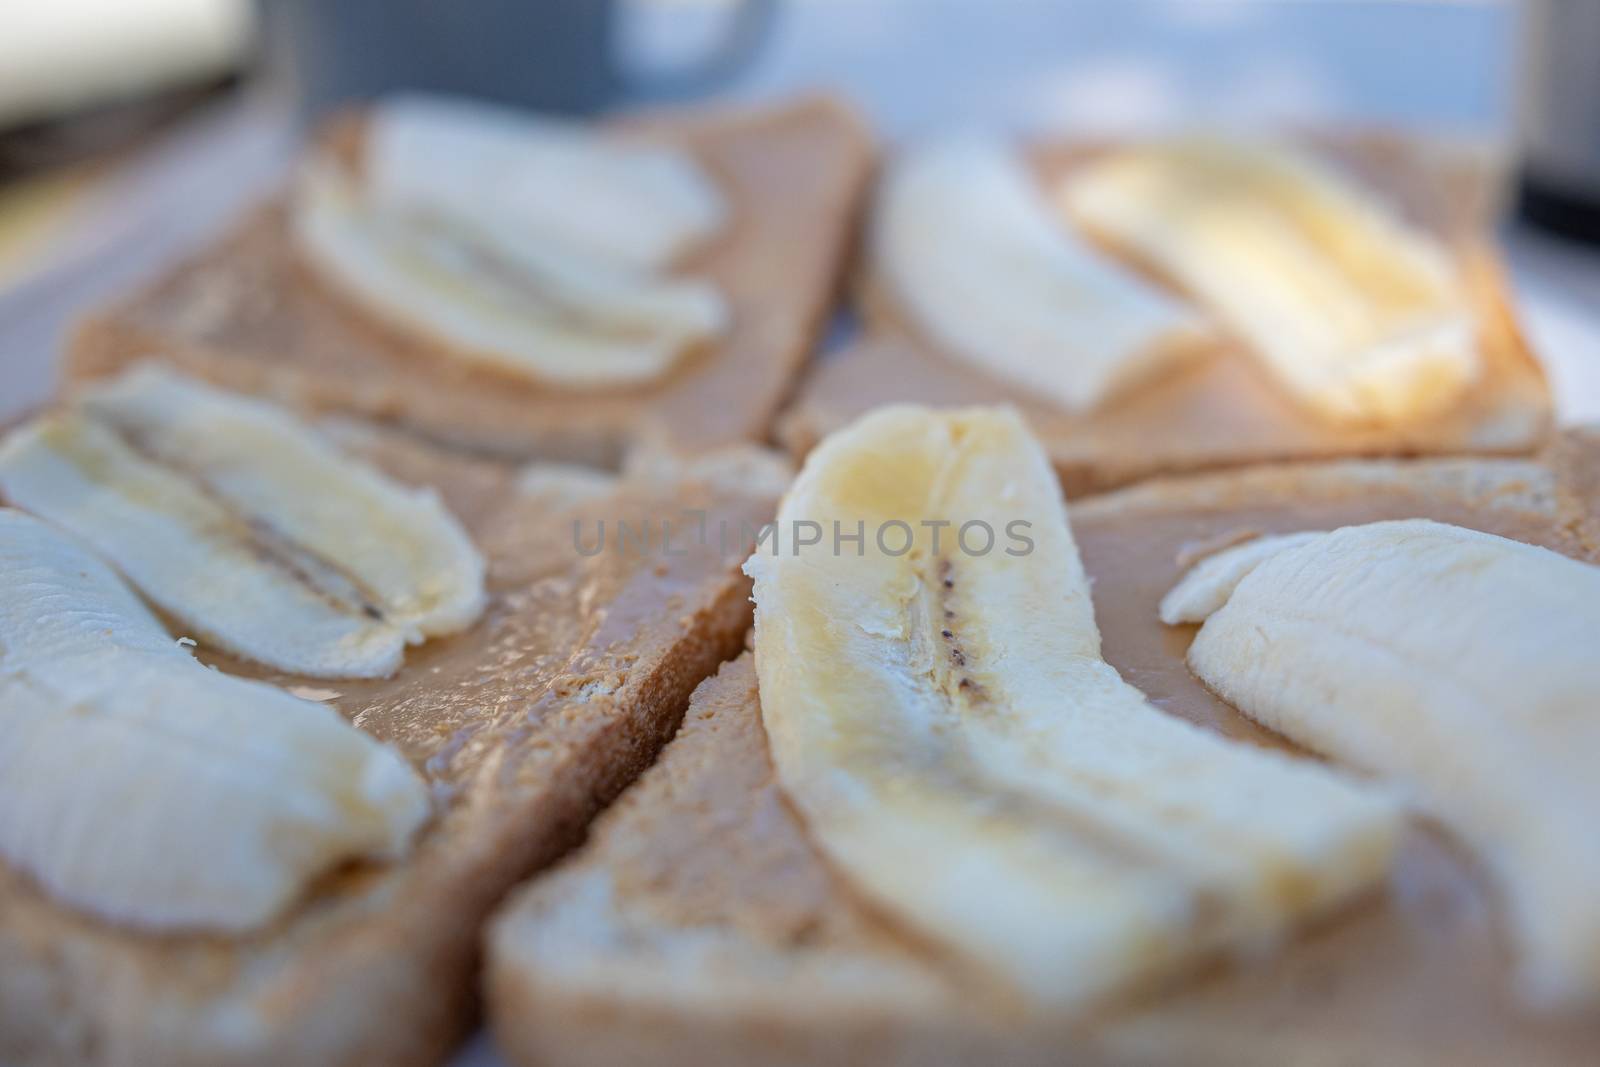 Peanut butter and banana sandwich typical Australian camping breakfast by MXW_Stock